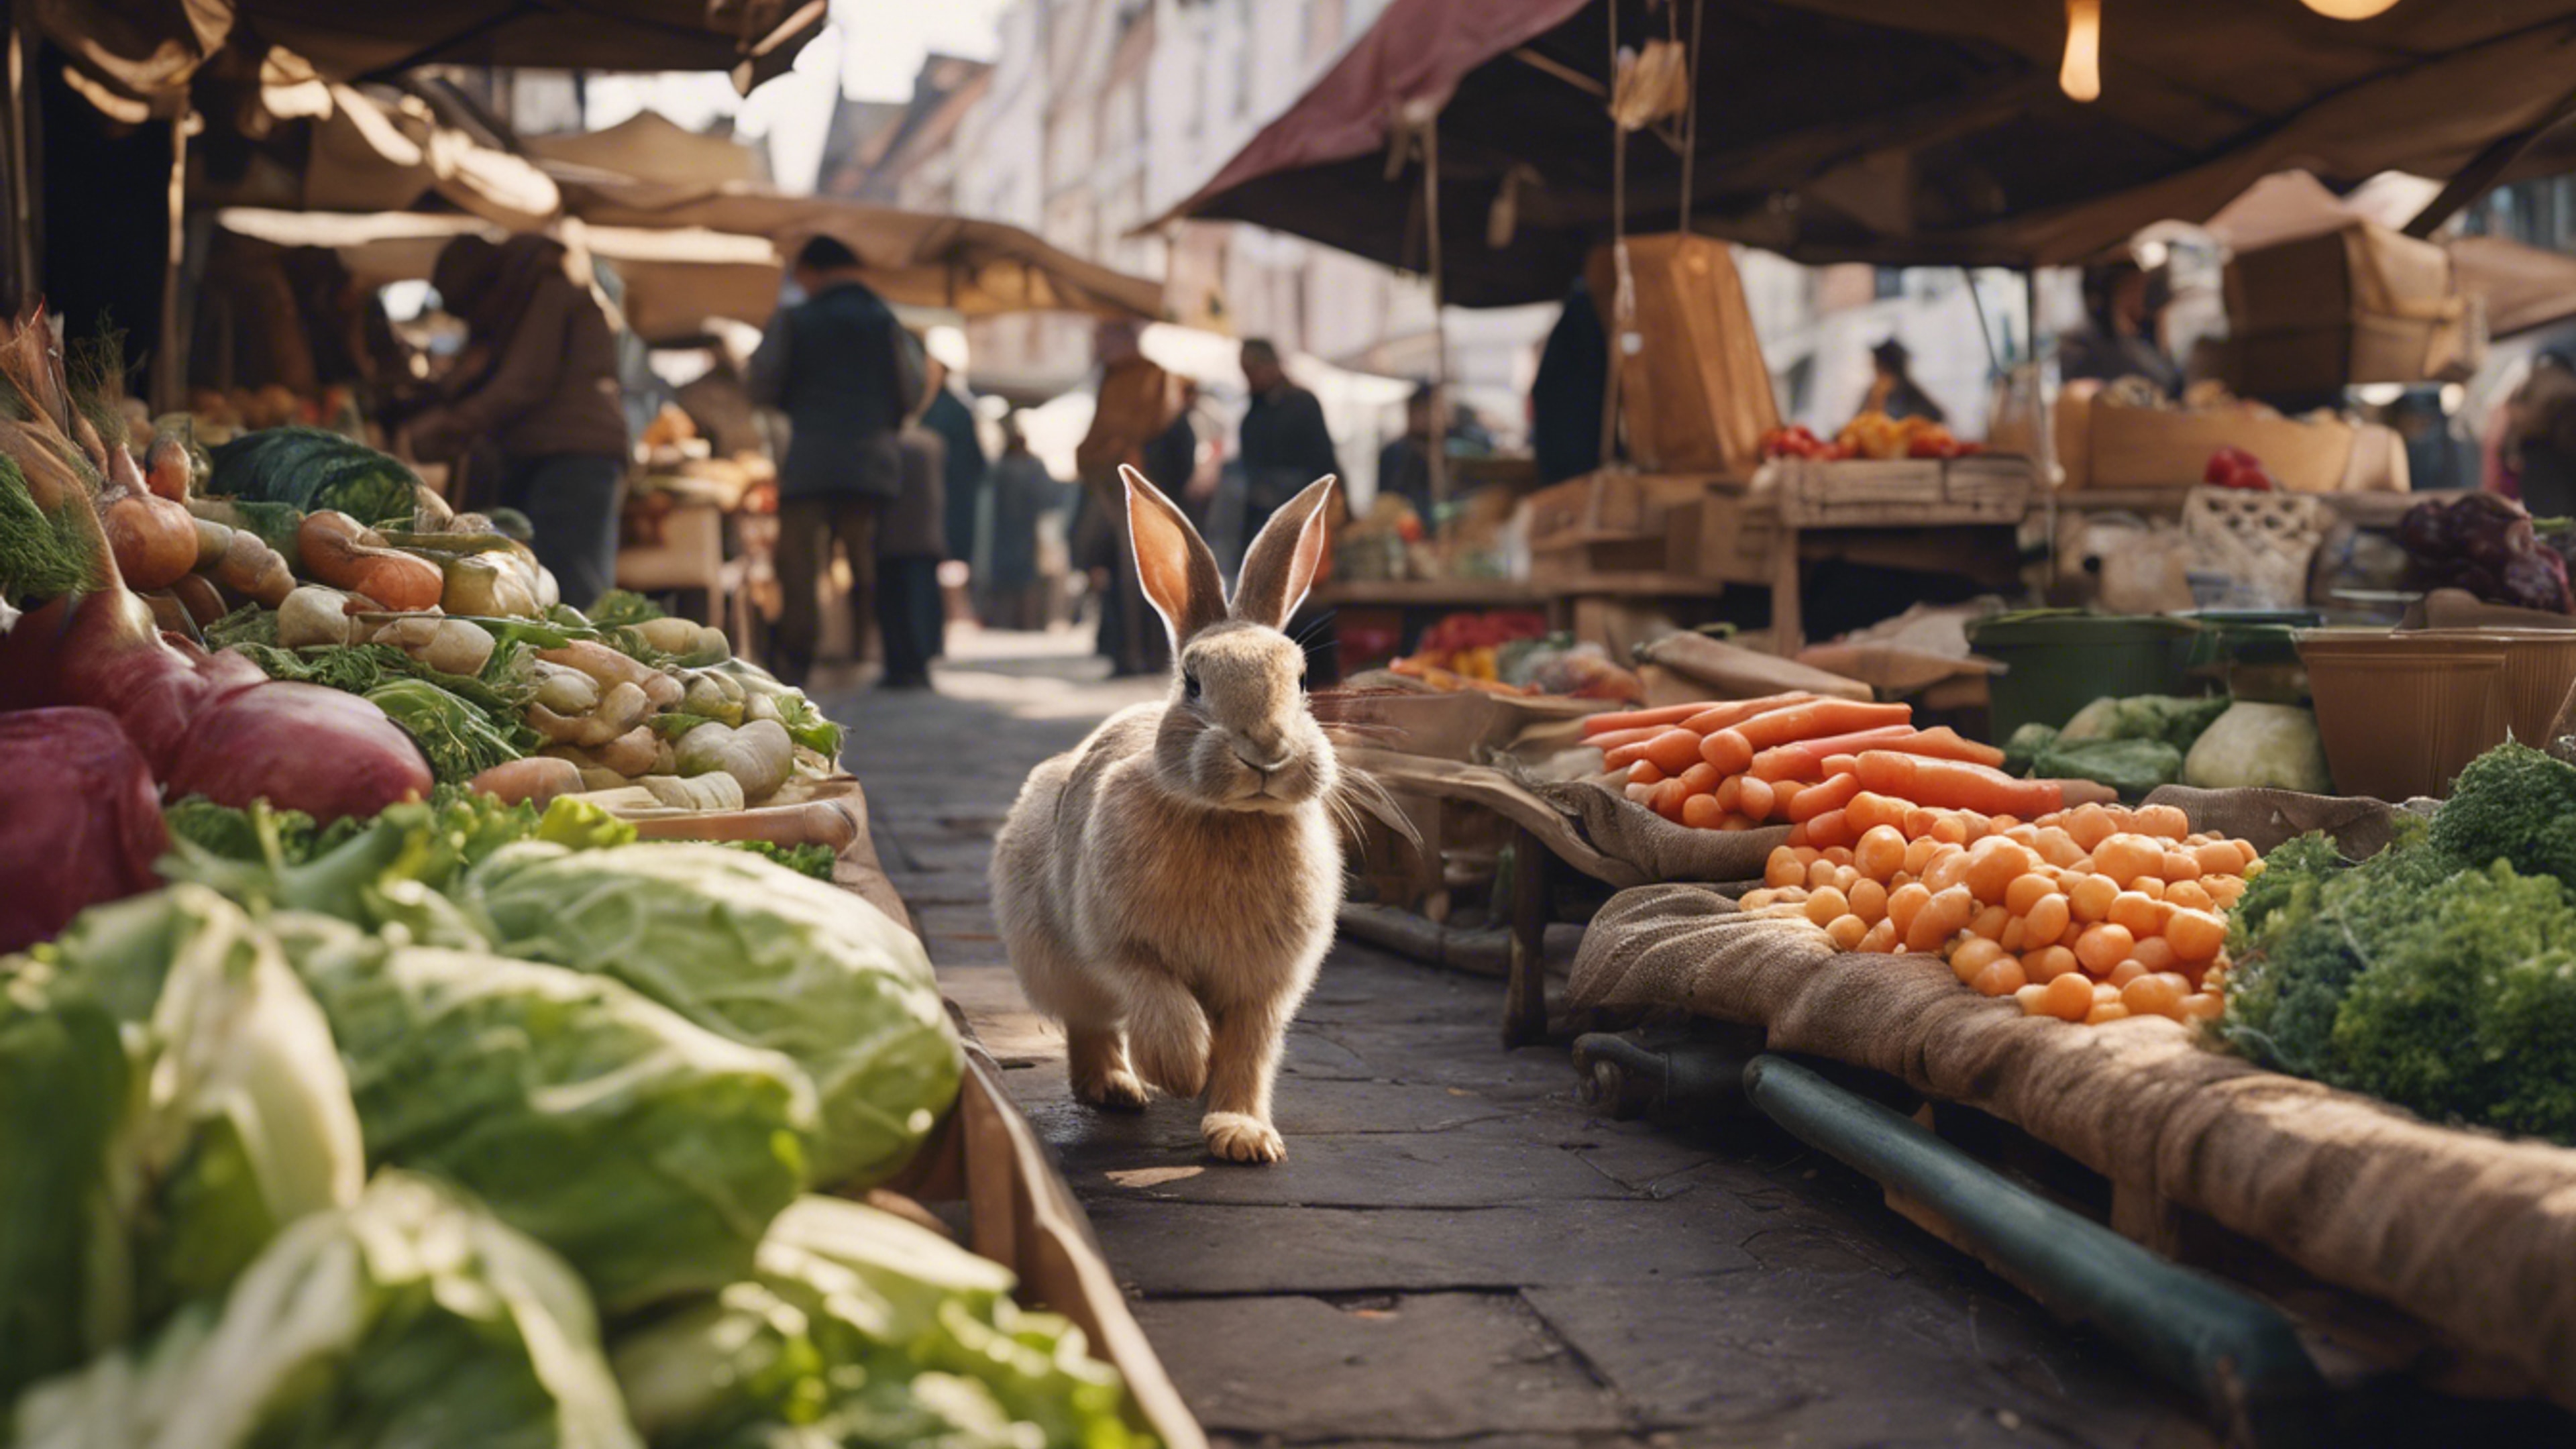 A rabbit running a vegetable stall in an old-fashioned market. Papel de parede[95b88699917c48c6bf62]